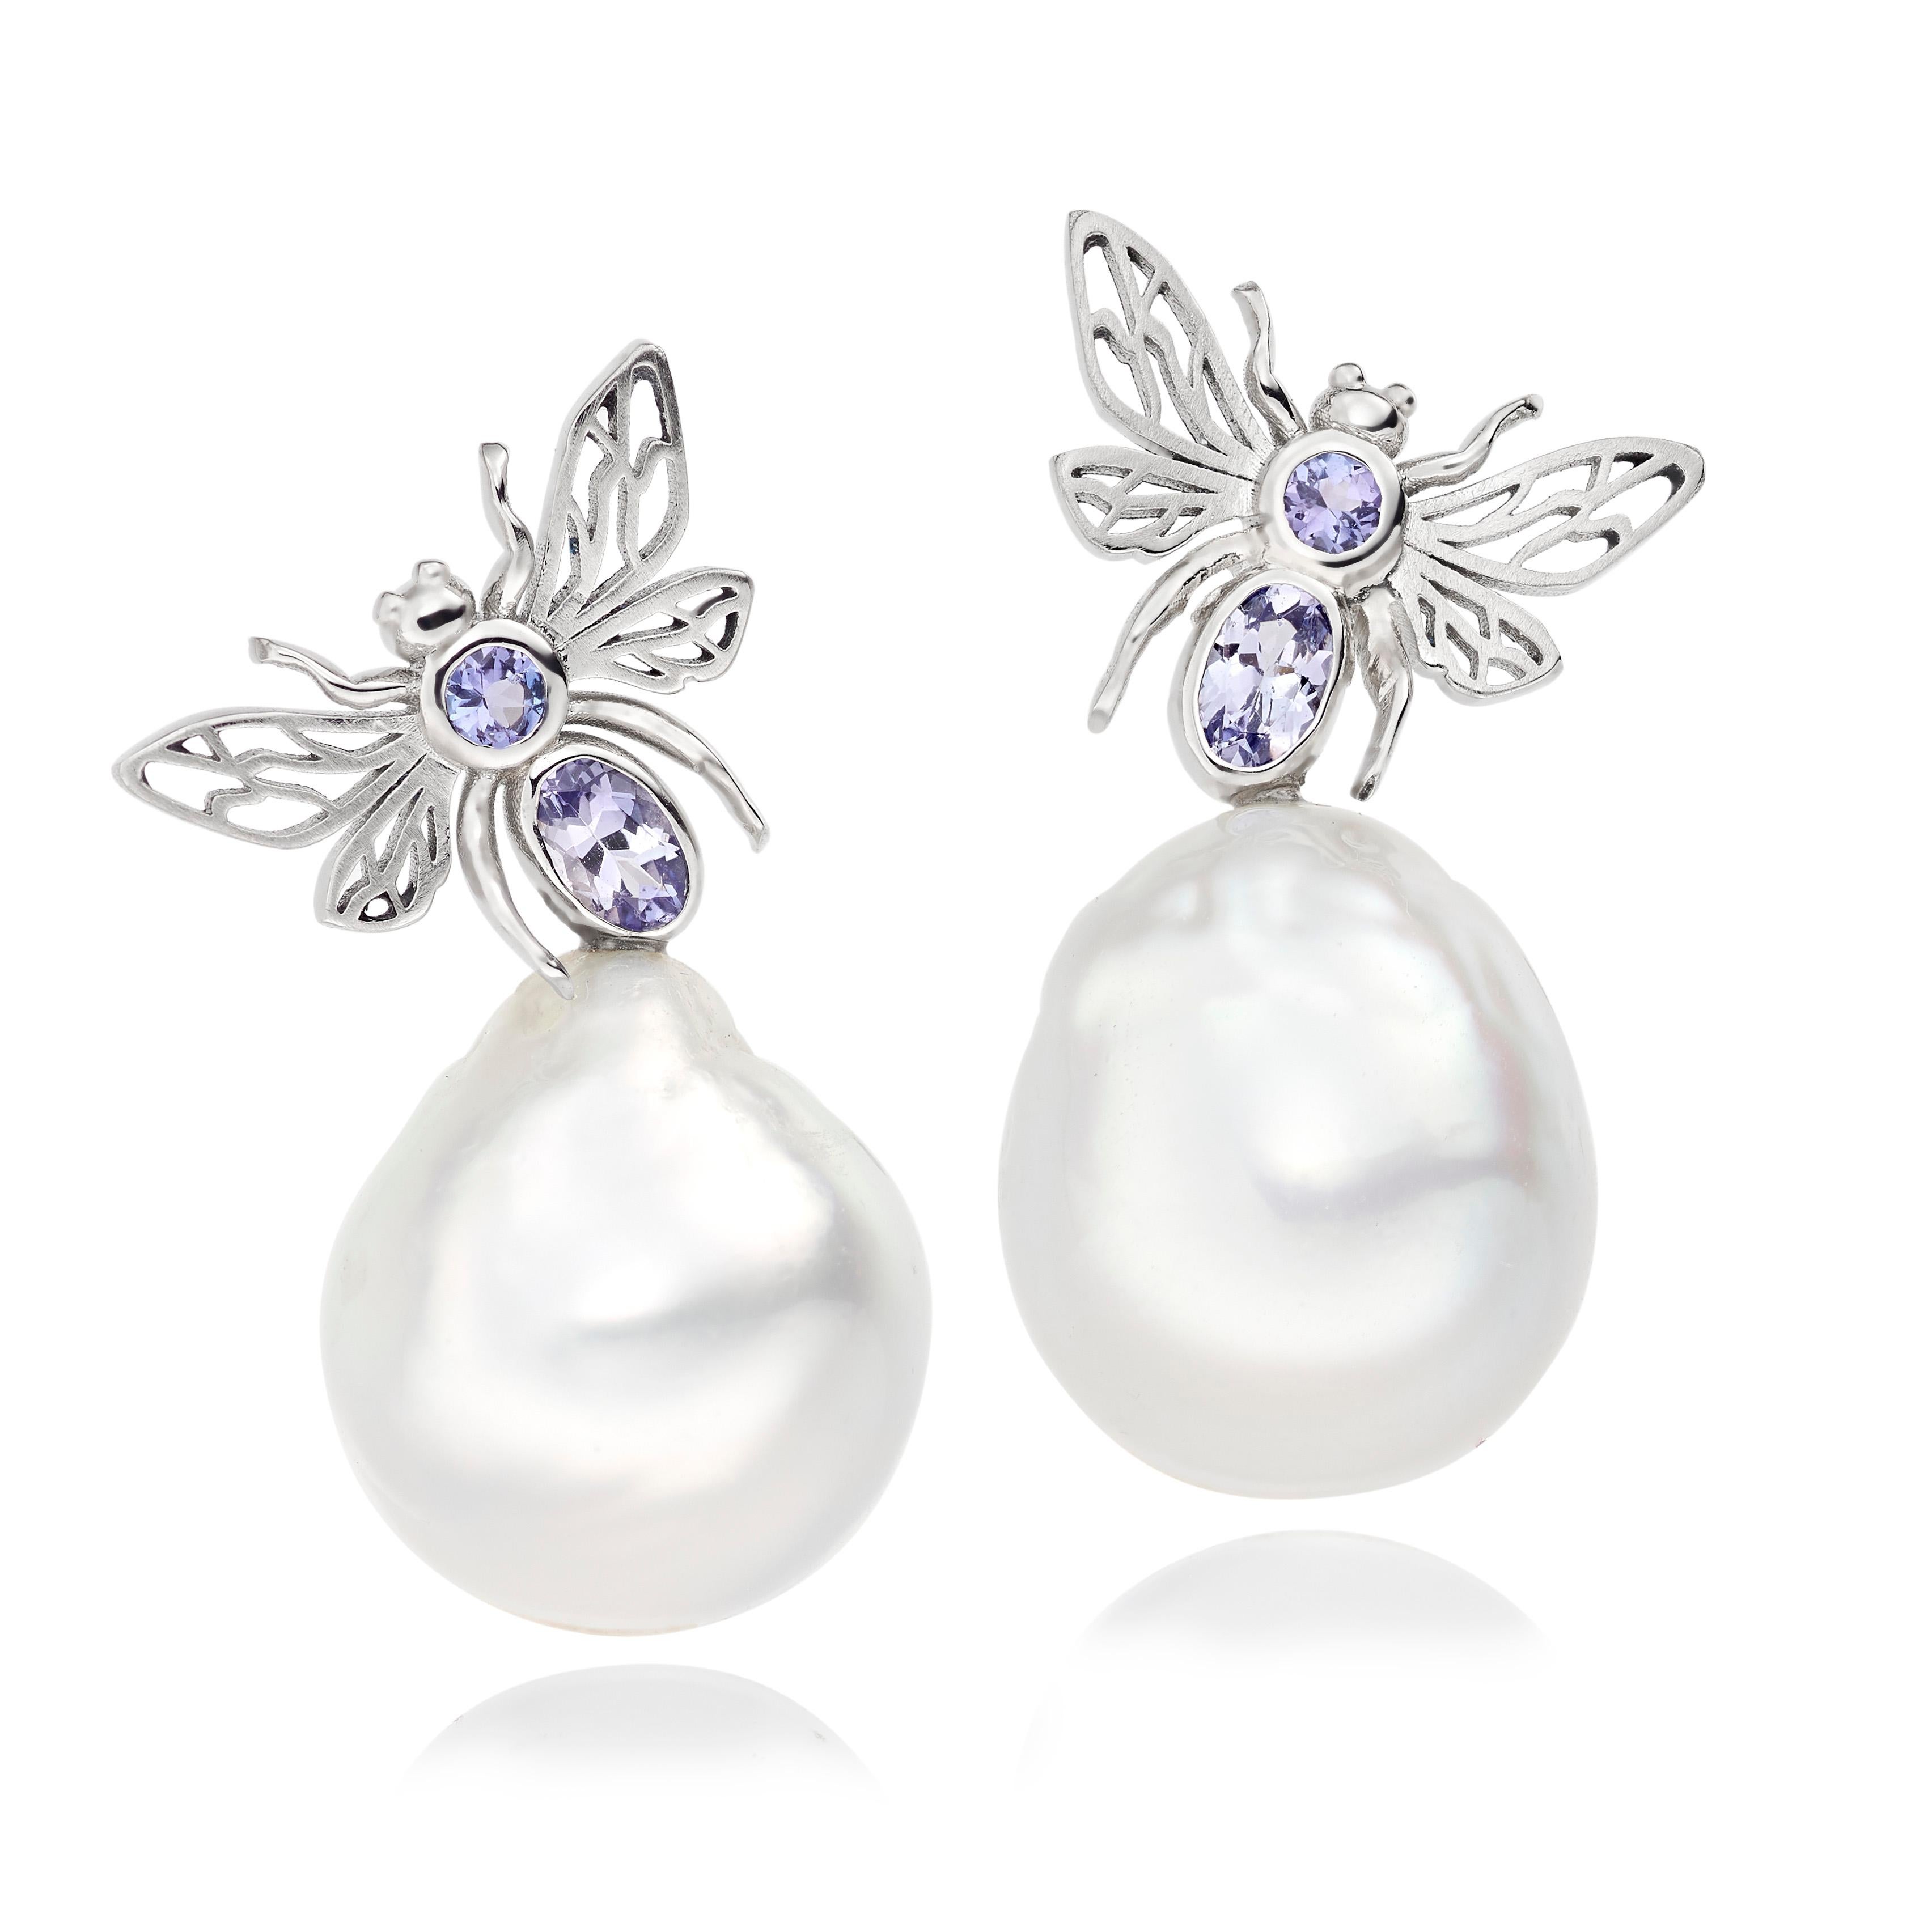 A pair of statement cocktail earrings from Lilly Hastedt's Fauna collection.  The earrings are set in Platinum with sparkling light blue Tanzanites and stunning baroque South Sea Pearls. 

Classic yet contemporary in design they will complement any